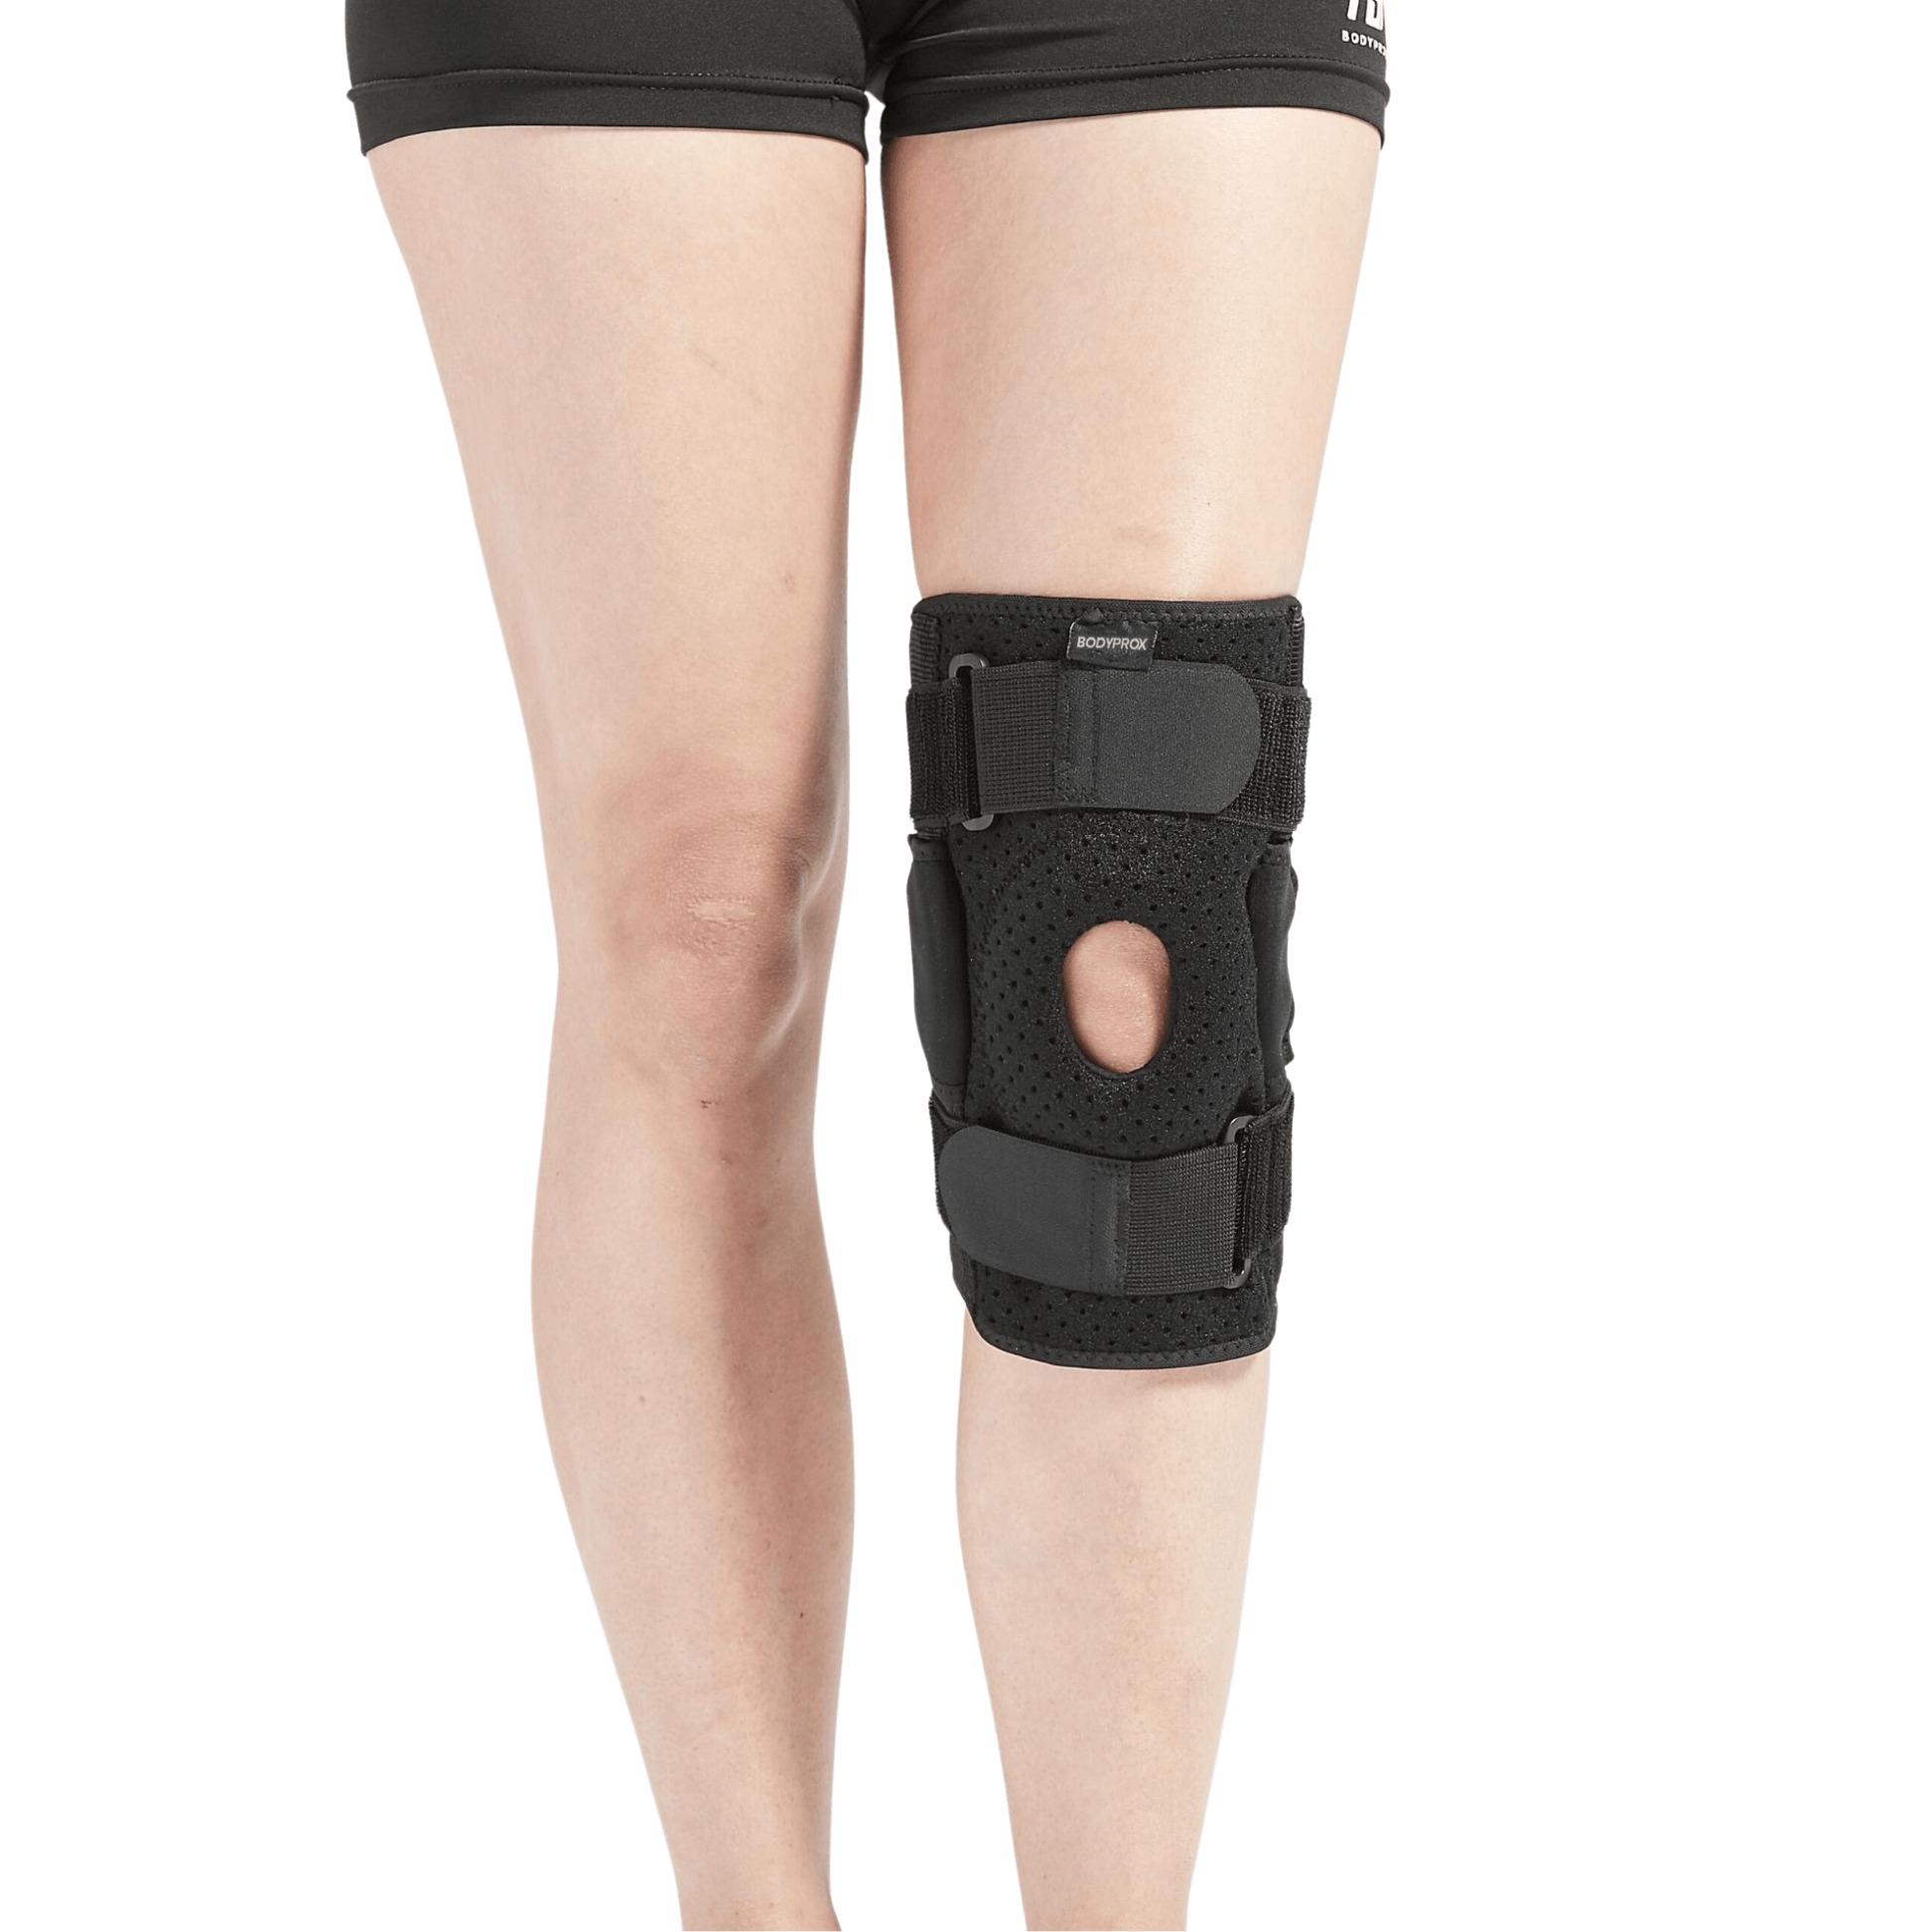 How does a Bracesox help while wearing a knee brace for big legs?